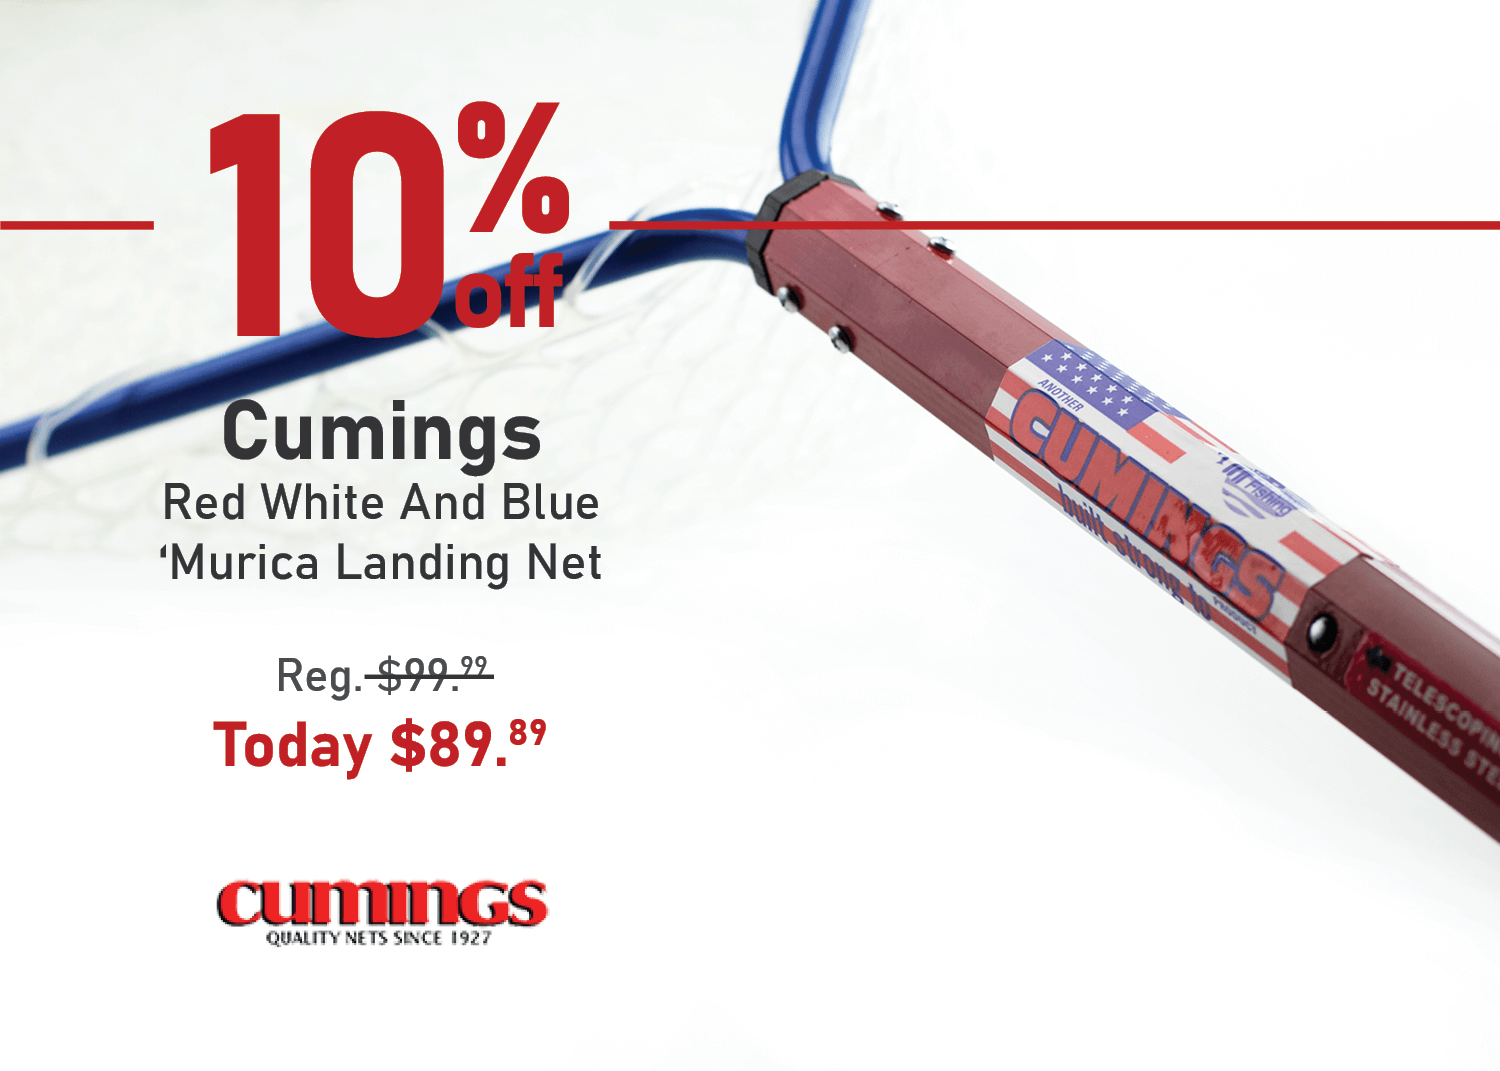 Save 10% on the Cumings Red White And Blue 'Murica Landing Net